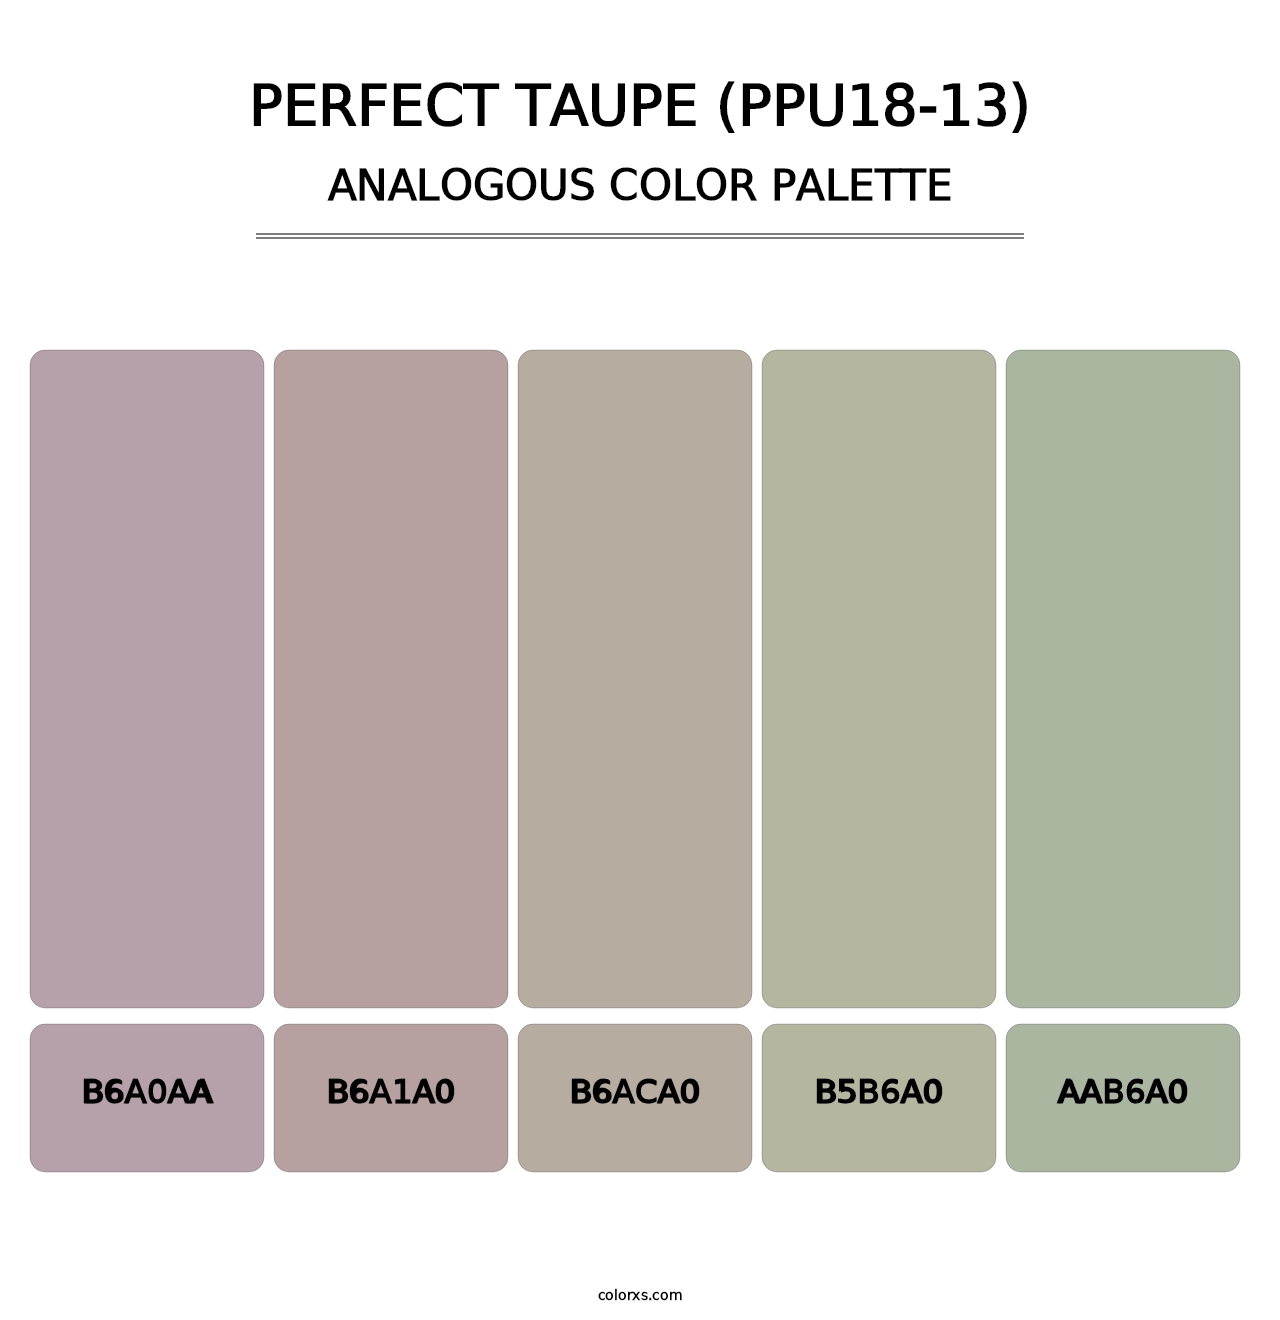 Perfect Taupe (PPU18-13) - Analogous Color Palette